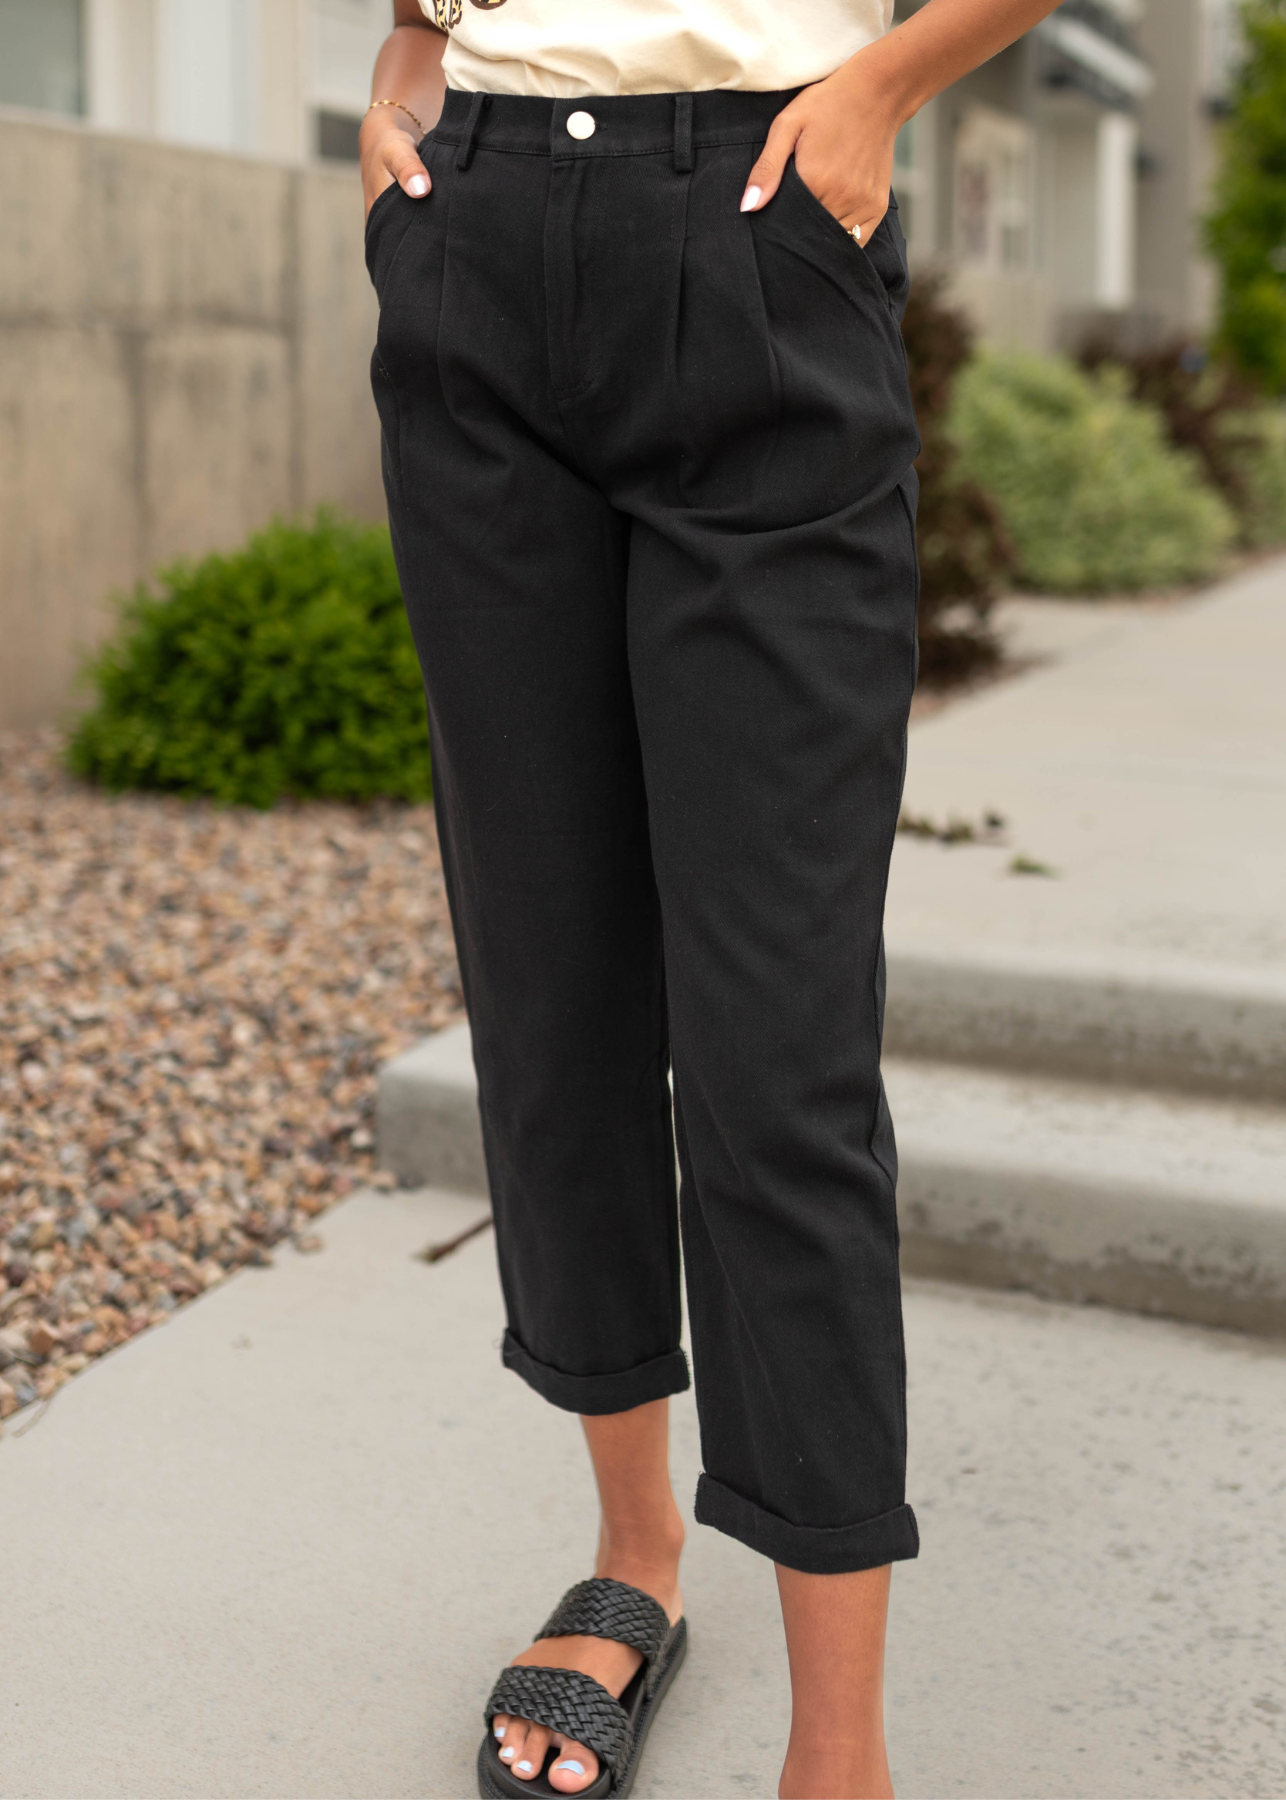 Pleated cropped black pants